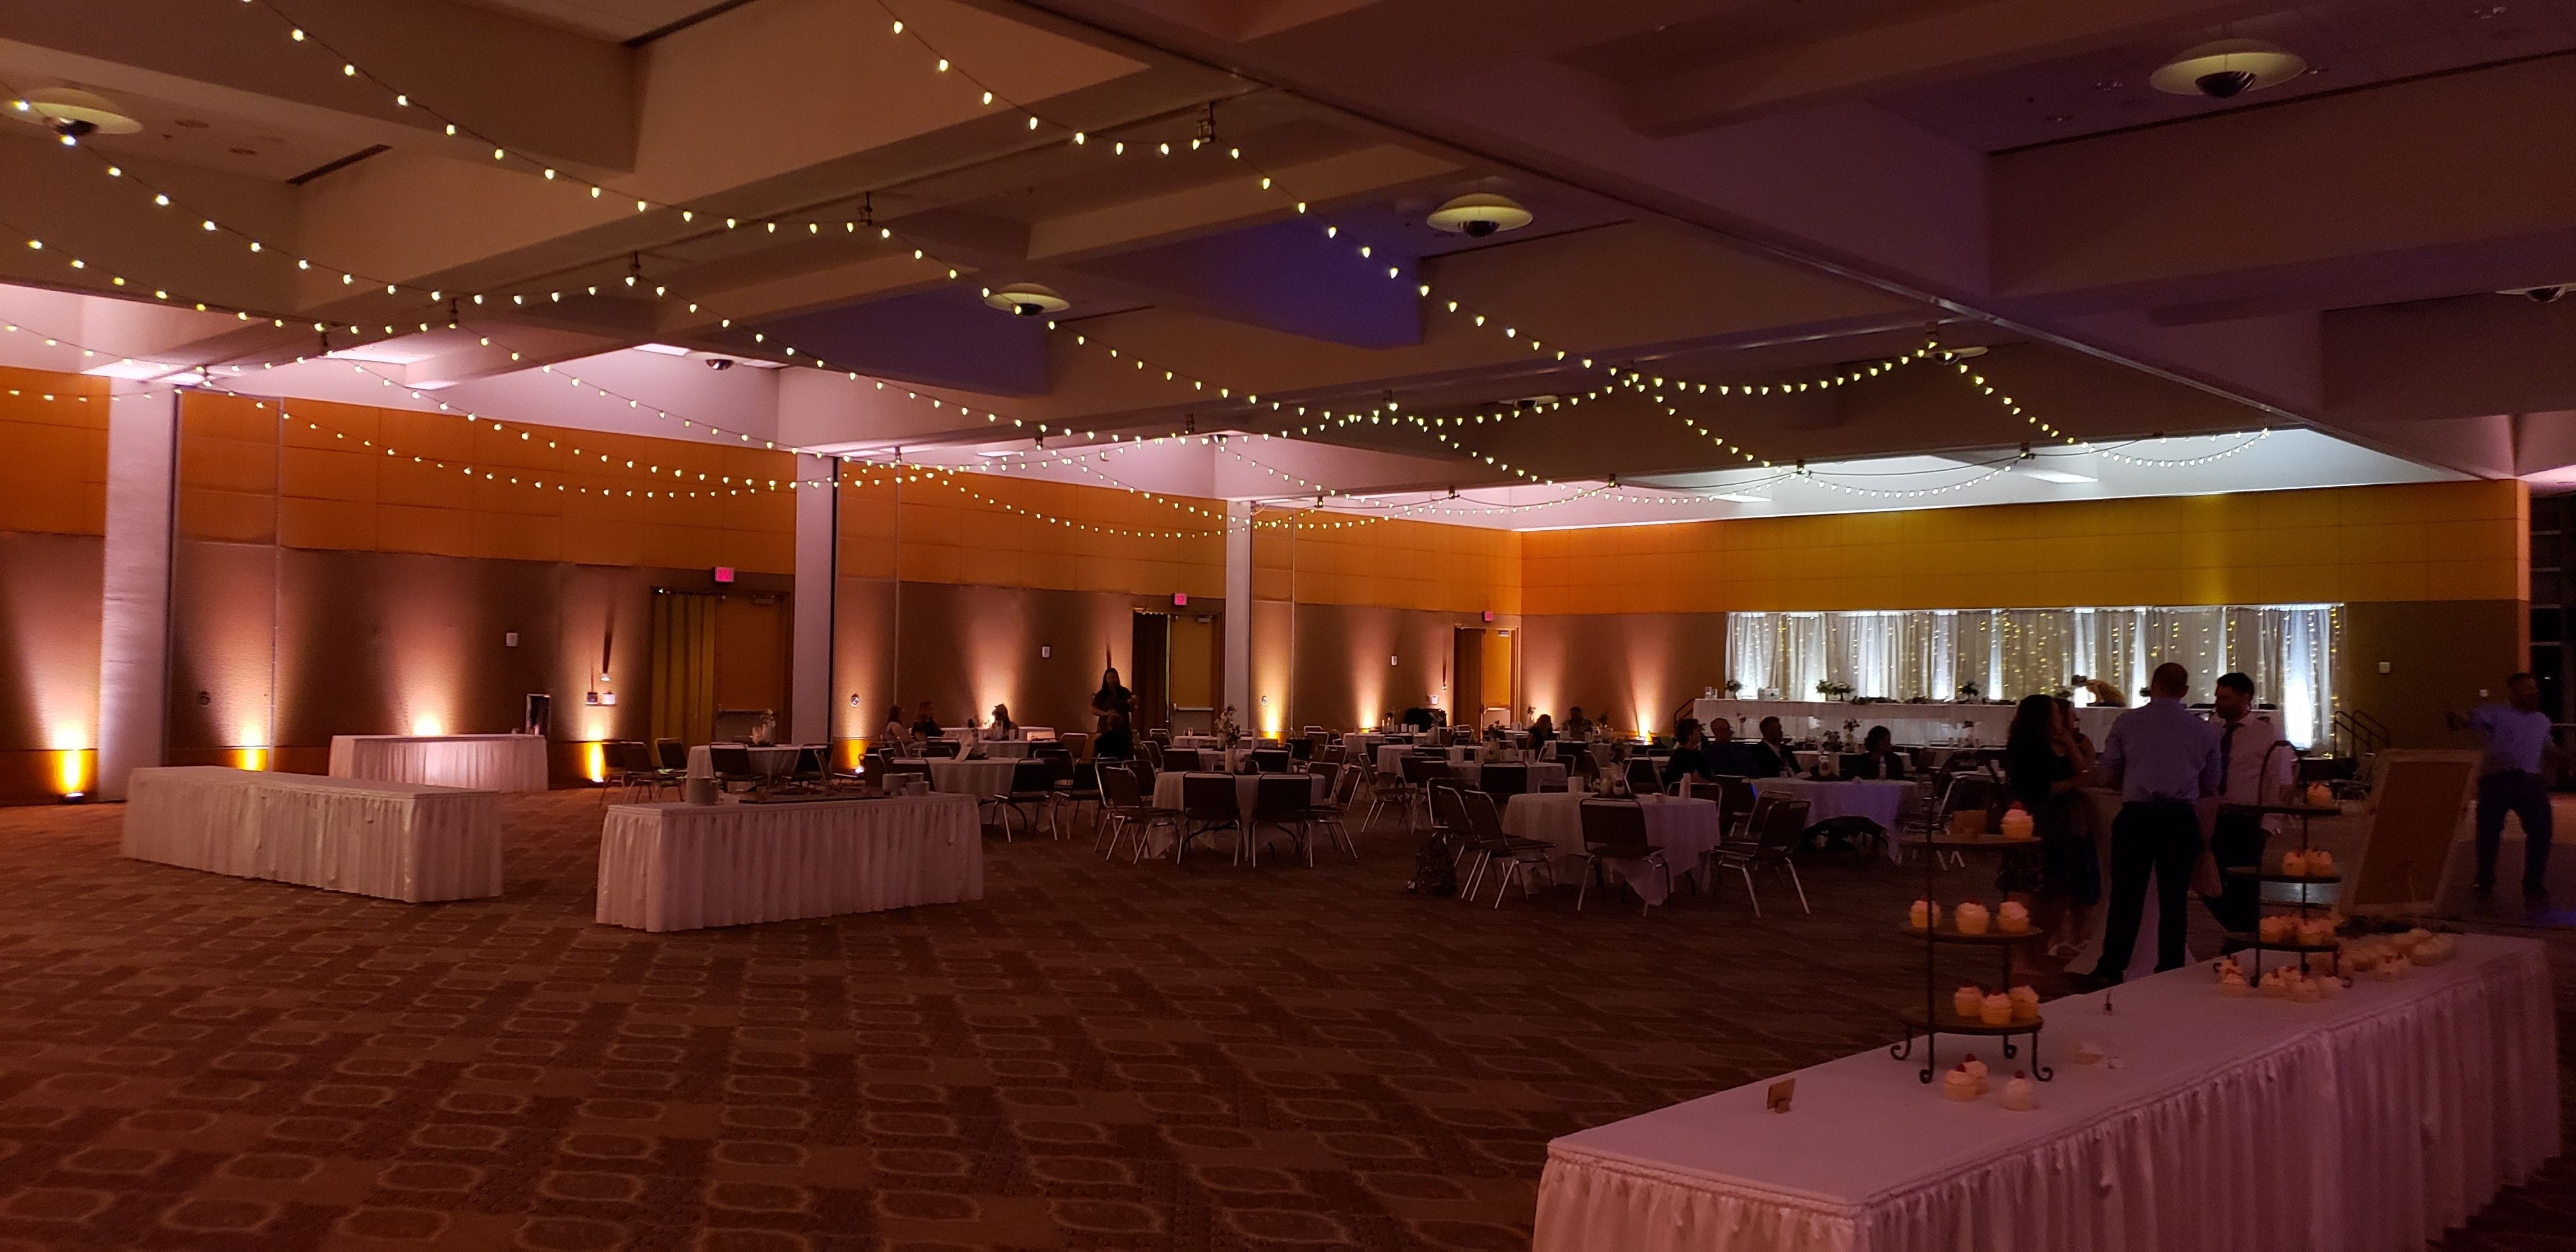 DECC, Harbor Side Ballroom. Wedding lighting in peach and soft white with bistro on the ceiling.